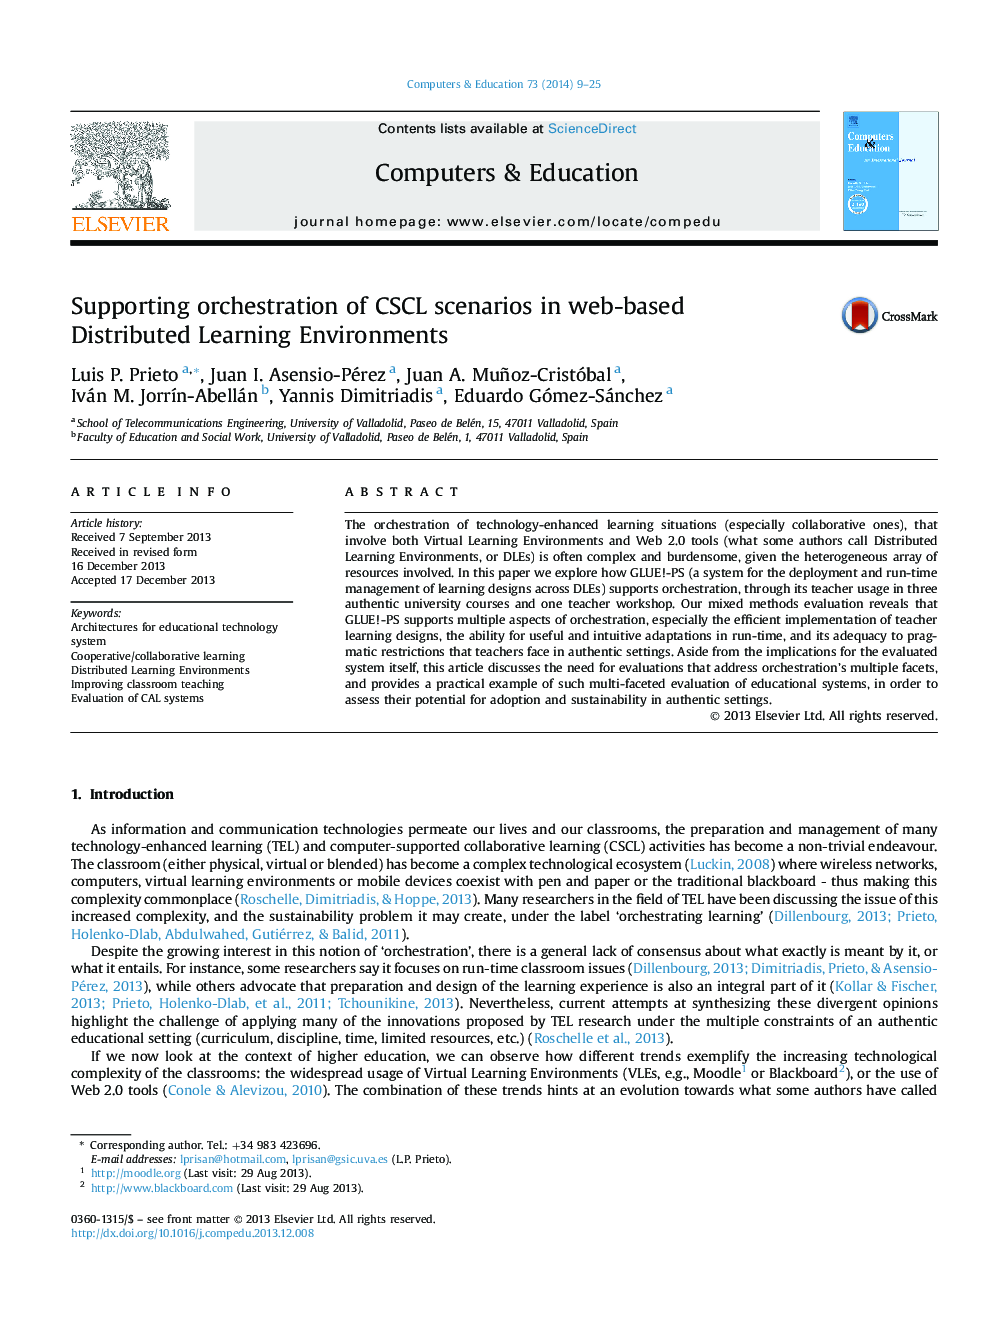 Supporting orchestration of CSCL scenarios in web-based Distributed Learning Environments